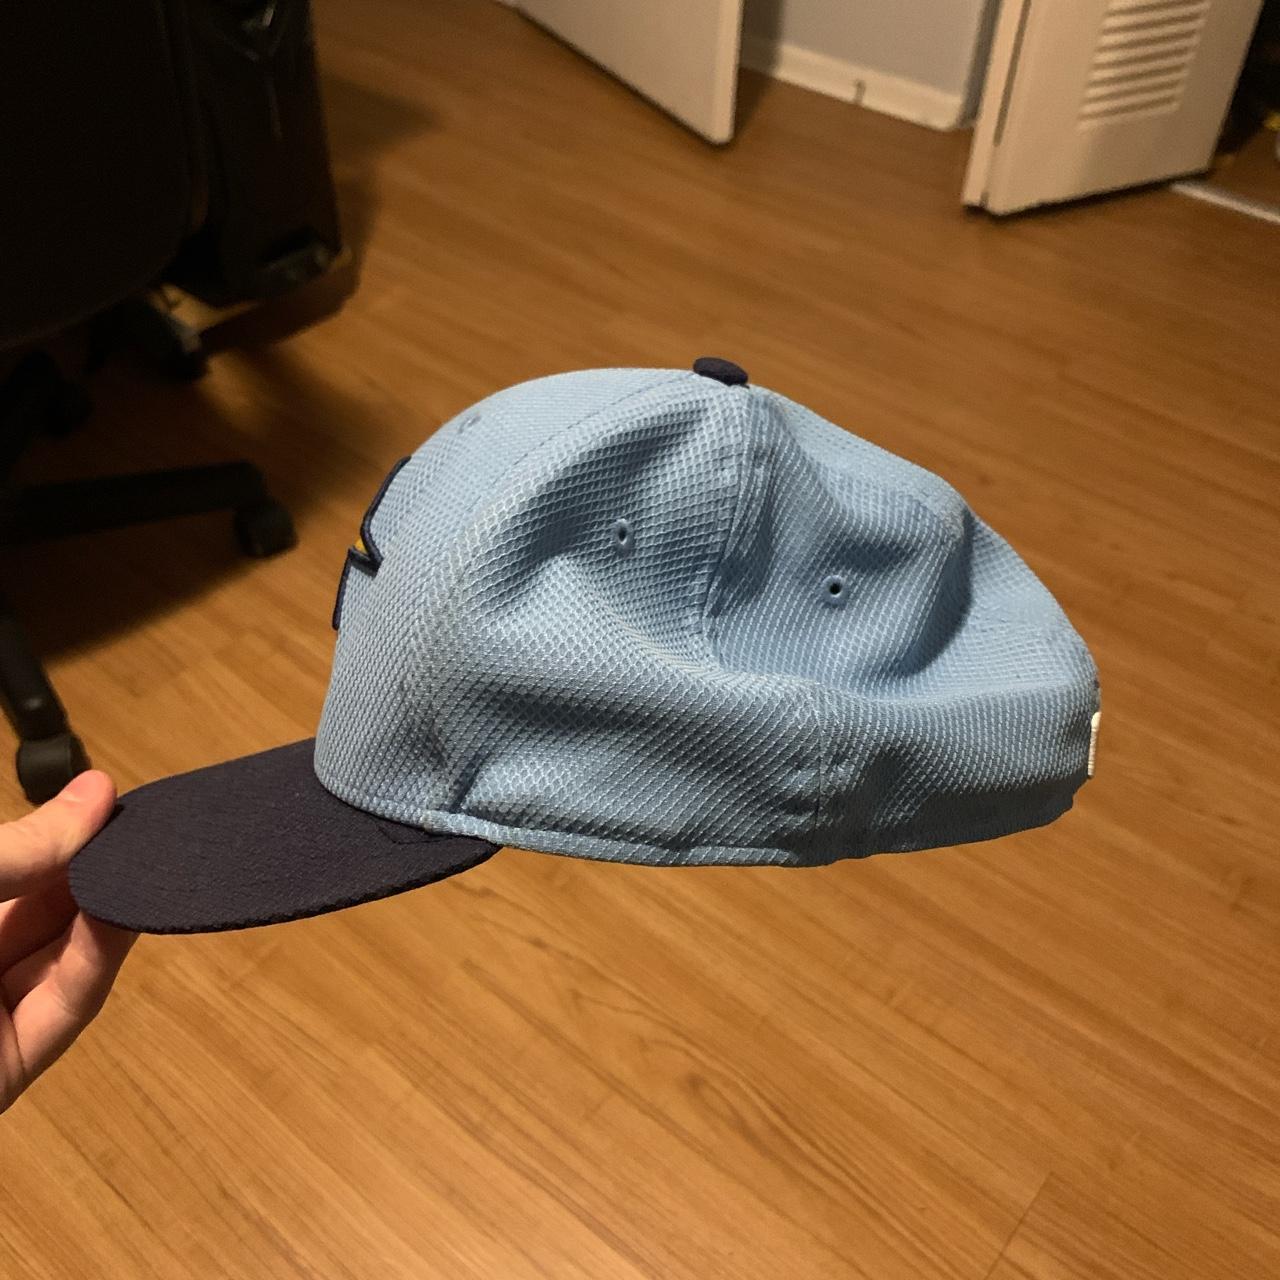 Tampa Bay Rays light blue spring training hat with - Depop